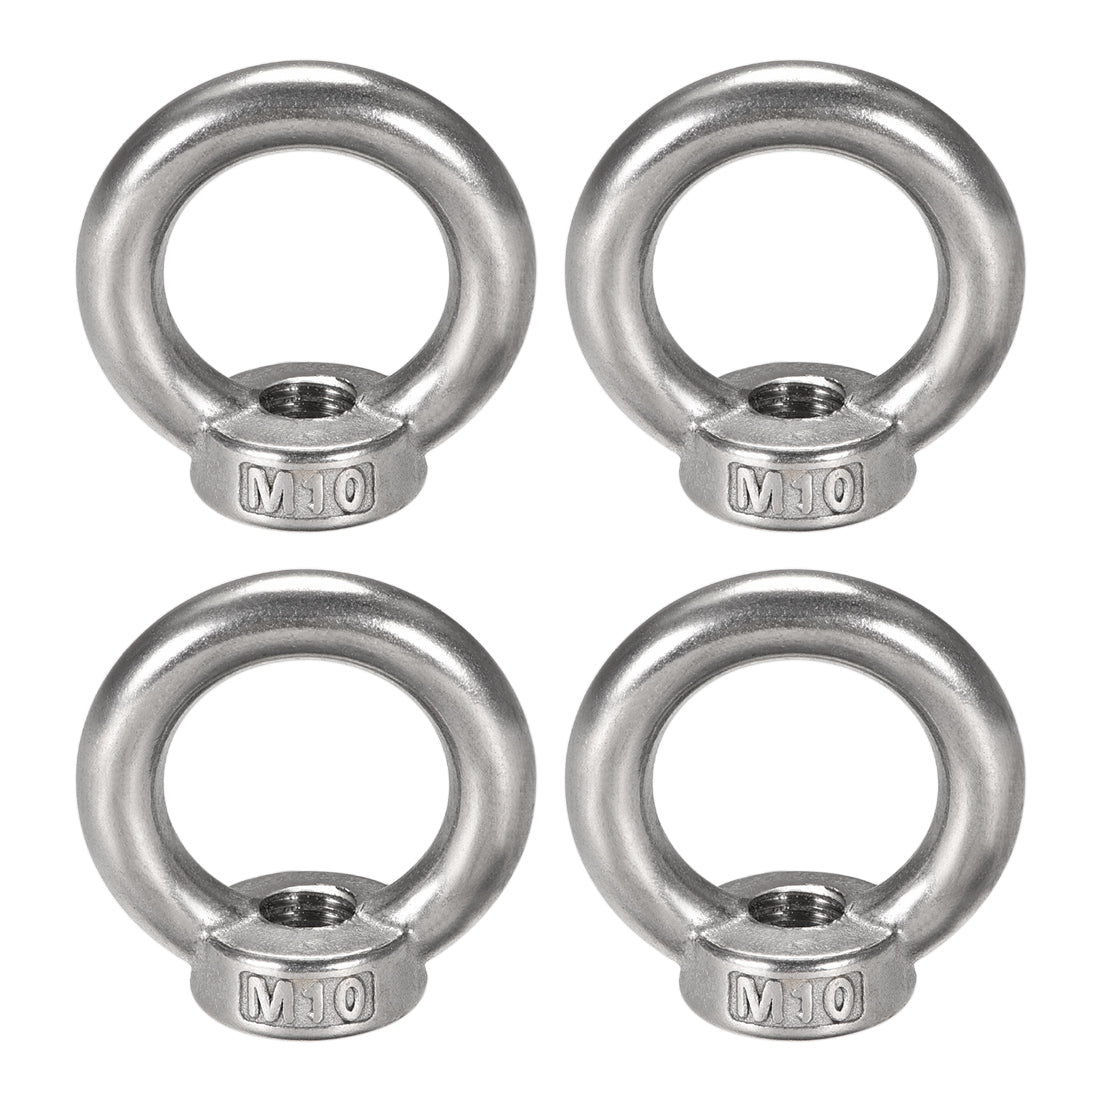 uxcell Uxcell Marine M10 Female Thread 304 Stainless Steel Lifting Eye Nuts Ring 4pcs